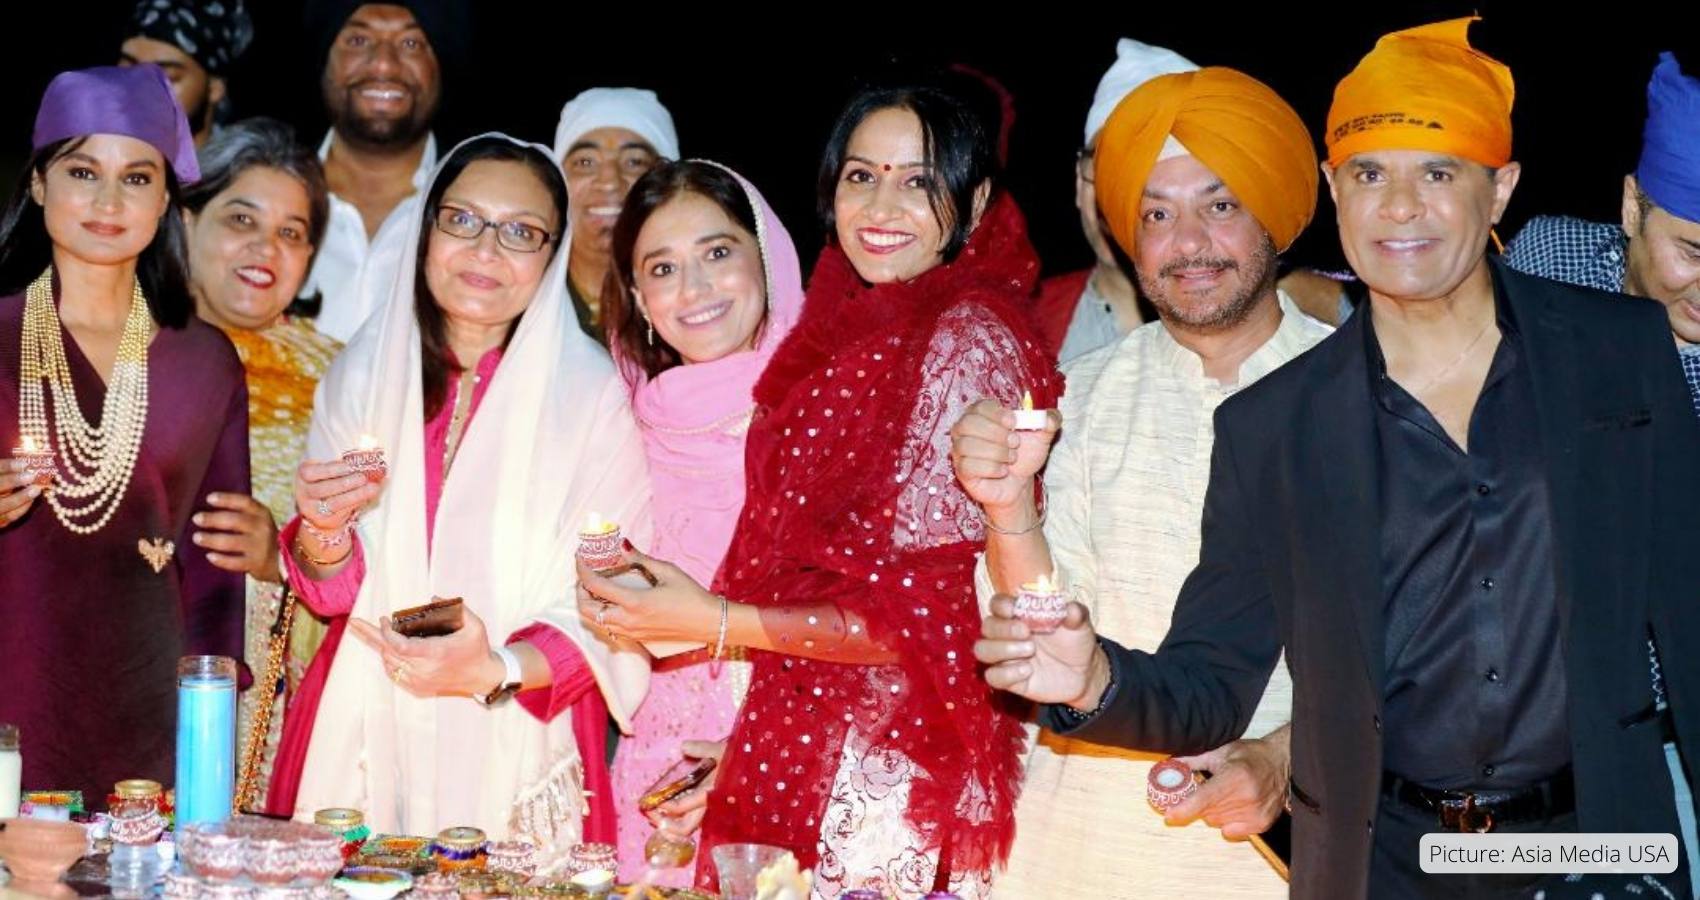 Diwali Celebration By Sikh Religious Society Attracts Over 2,000 People